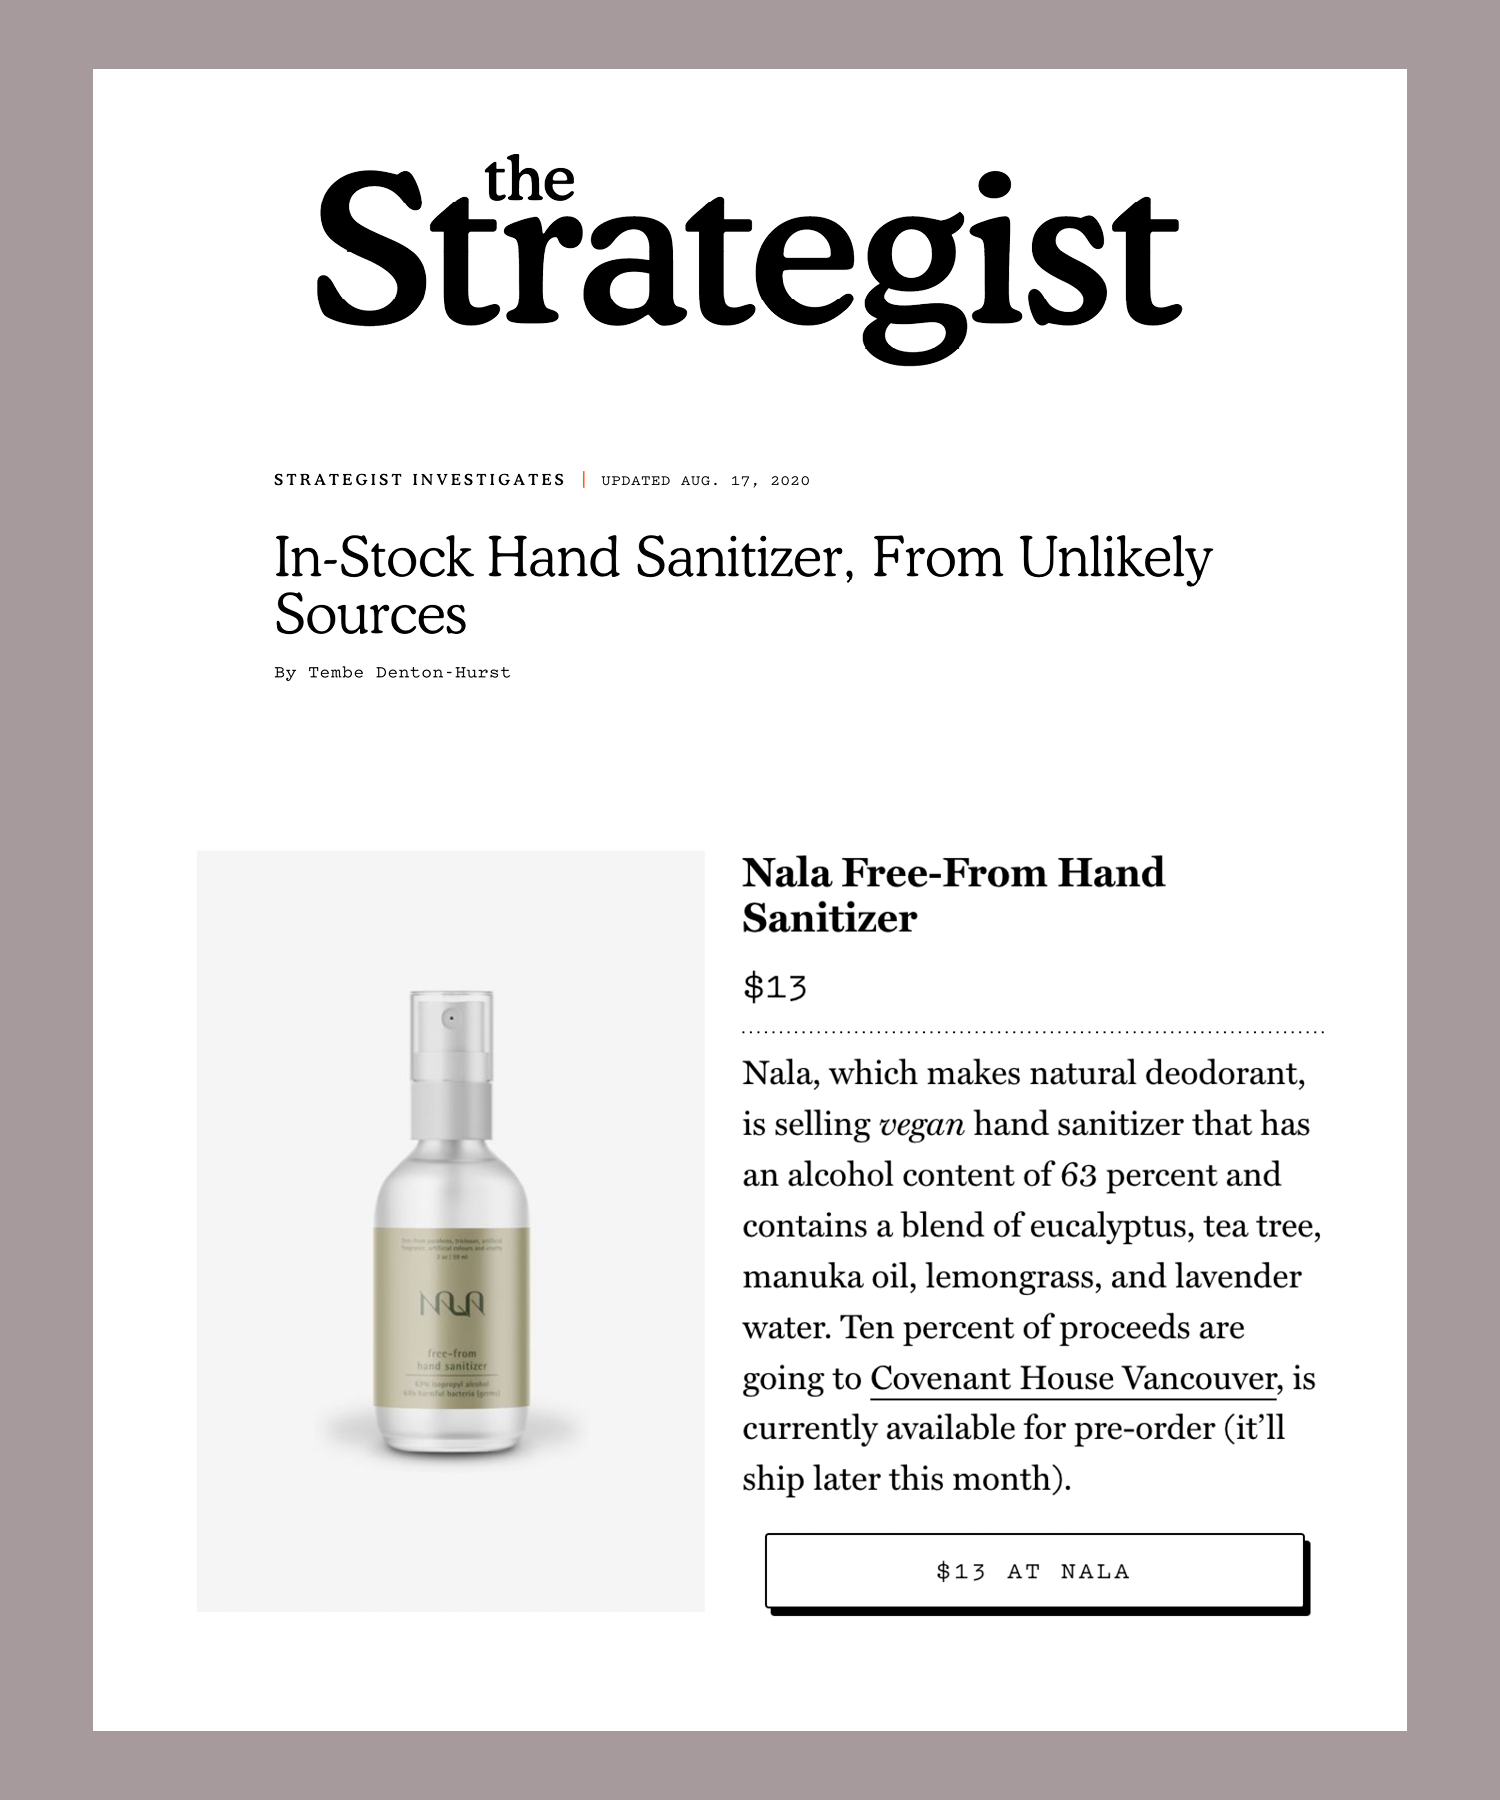 In-Stock Hand Sanitizer, From Unlikely Sources